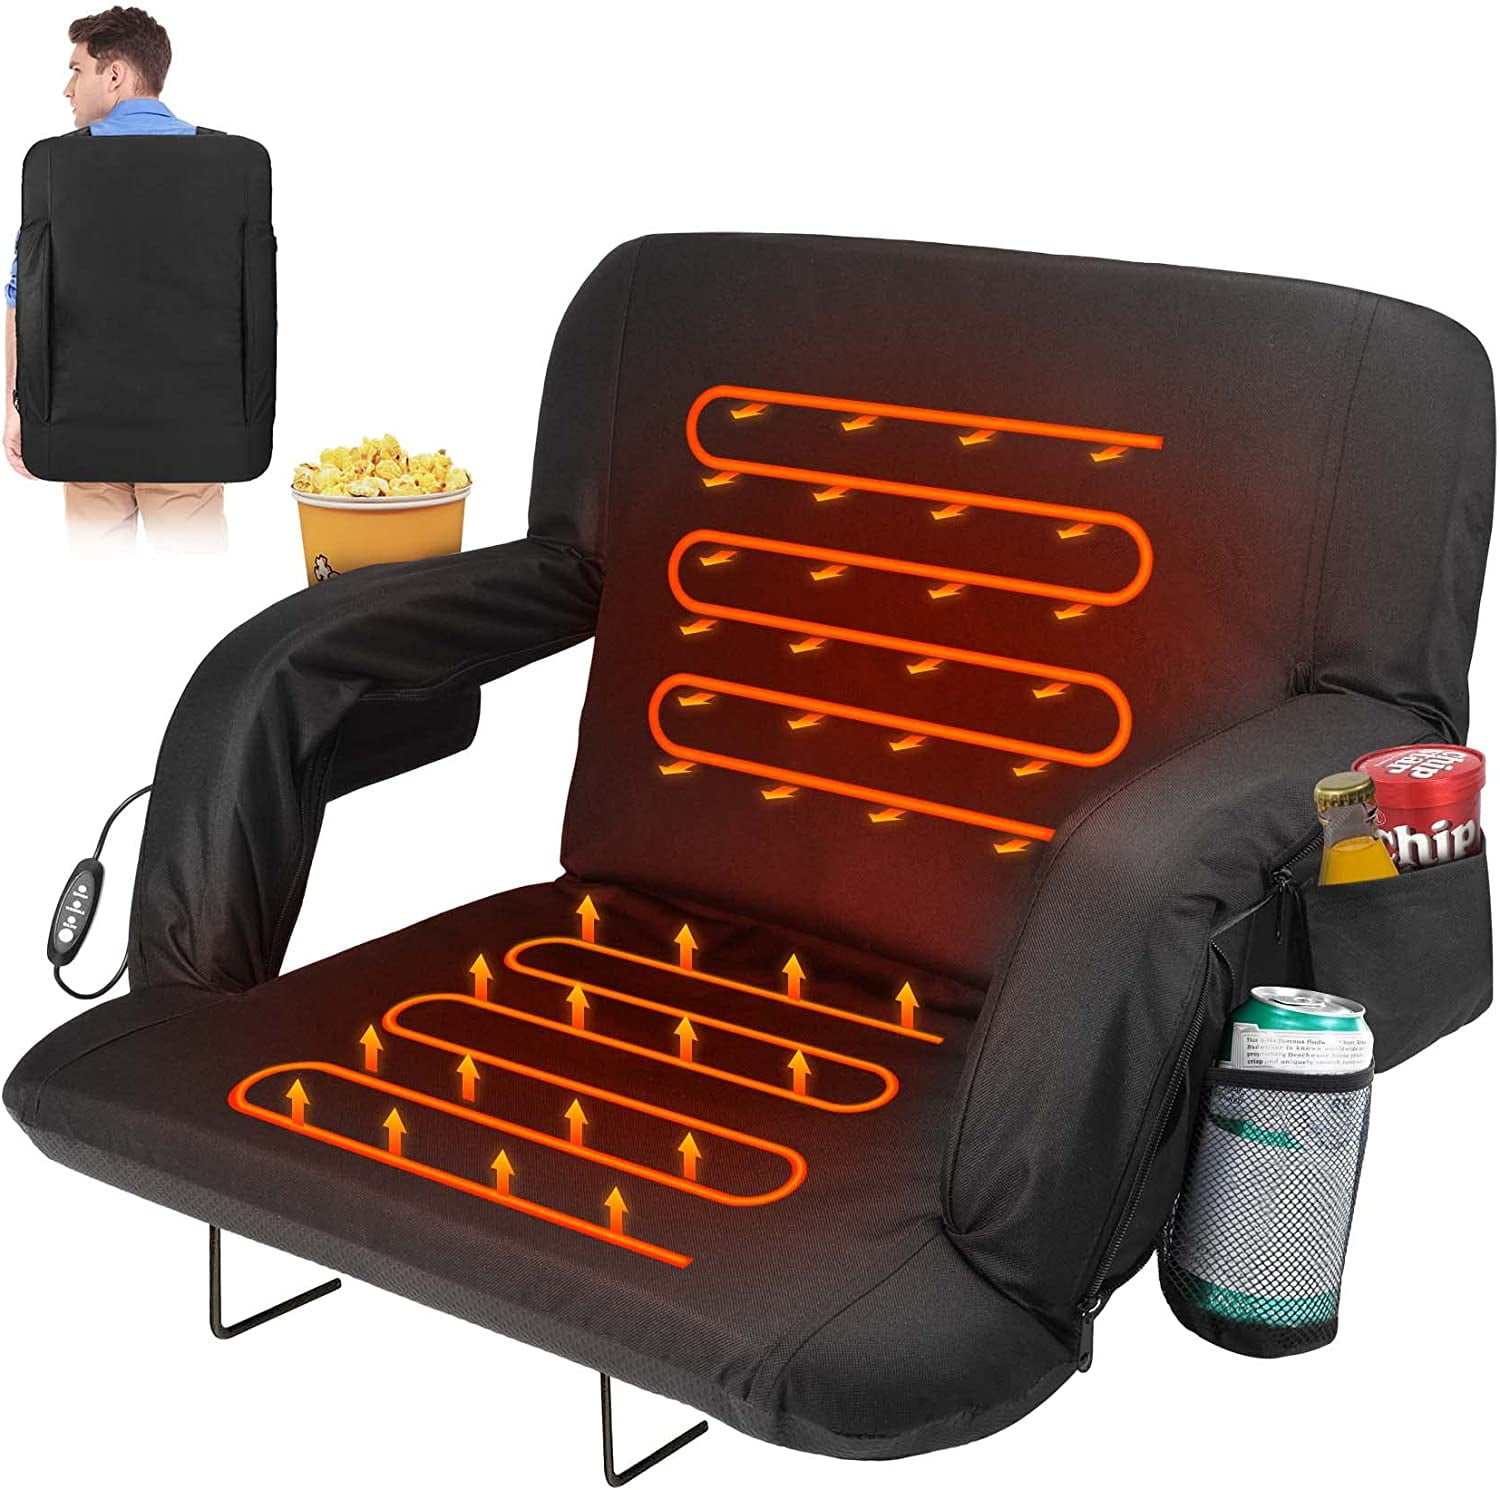 Heated Stadium Seat,Foldable Portable Bleacher Chair,Electric Heated Seat  Cushion with Back Support Shoulder Strap,Waterproof Anti-Slip Bottom,Stadium  Chairs for Outdoor Sporting Games Camping Travel - Yahoo Shopping